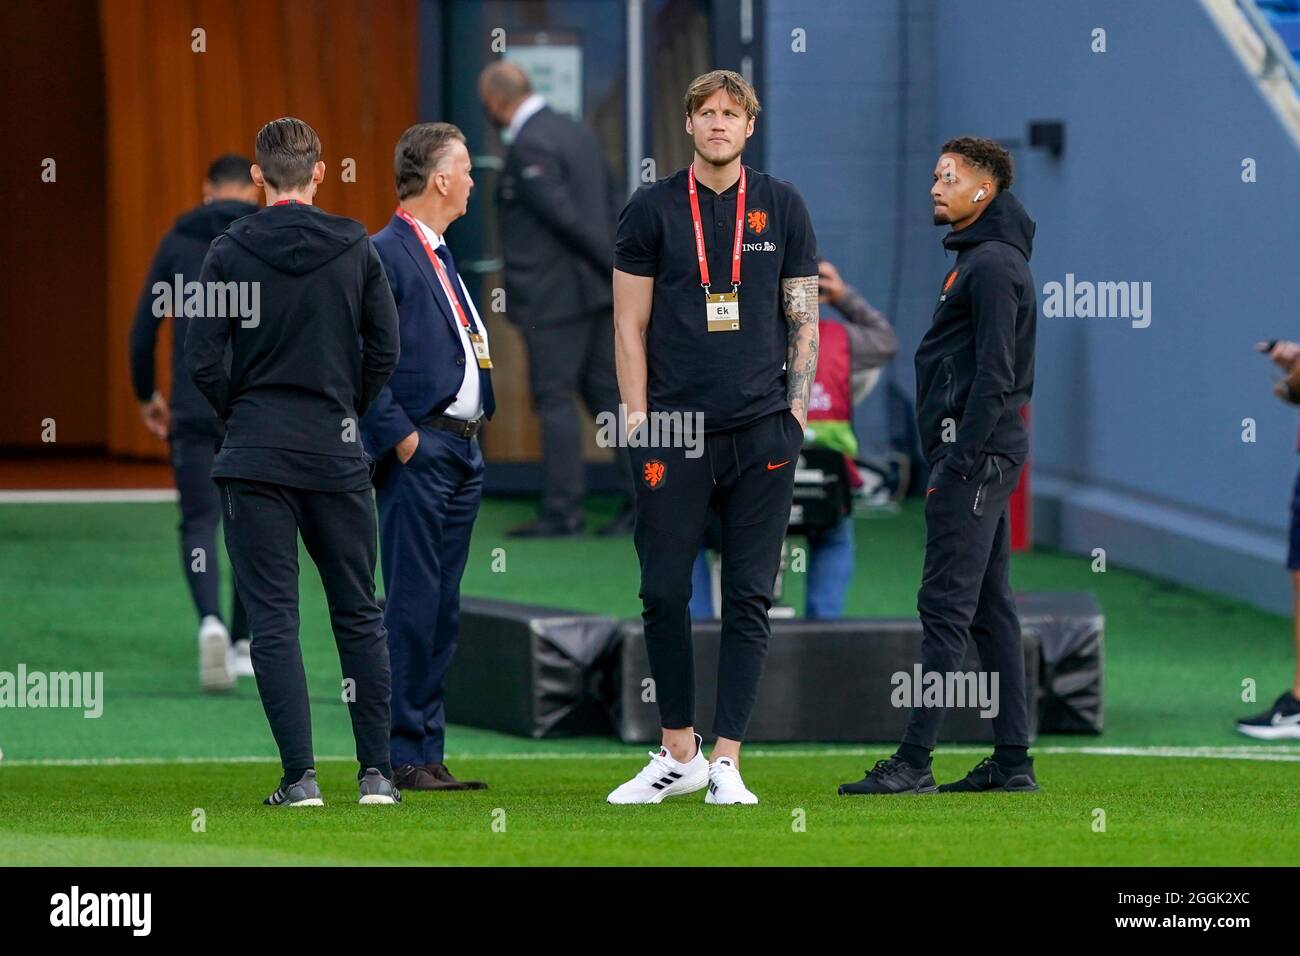 OSLO, NORWAY - SEPTEMBER 1: coach Louis van Gaal of the Netherlands, Wout  Weghorst of the Netherlands, Jurrien Timber of the Netherlands during the  World Cup Qualifier match between Norway and Netherlands